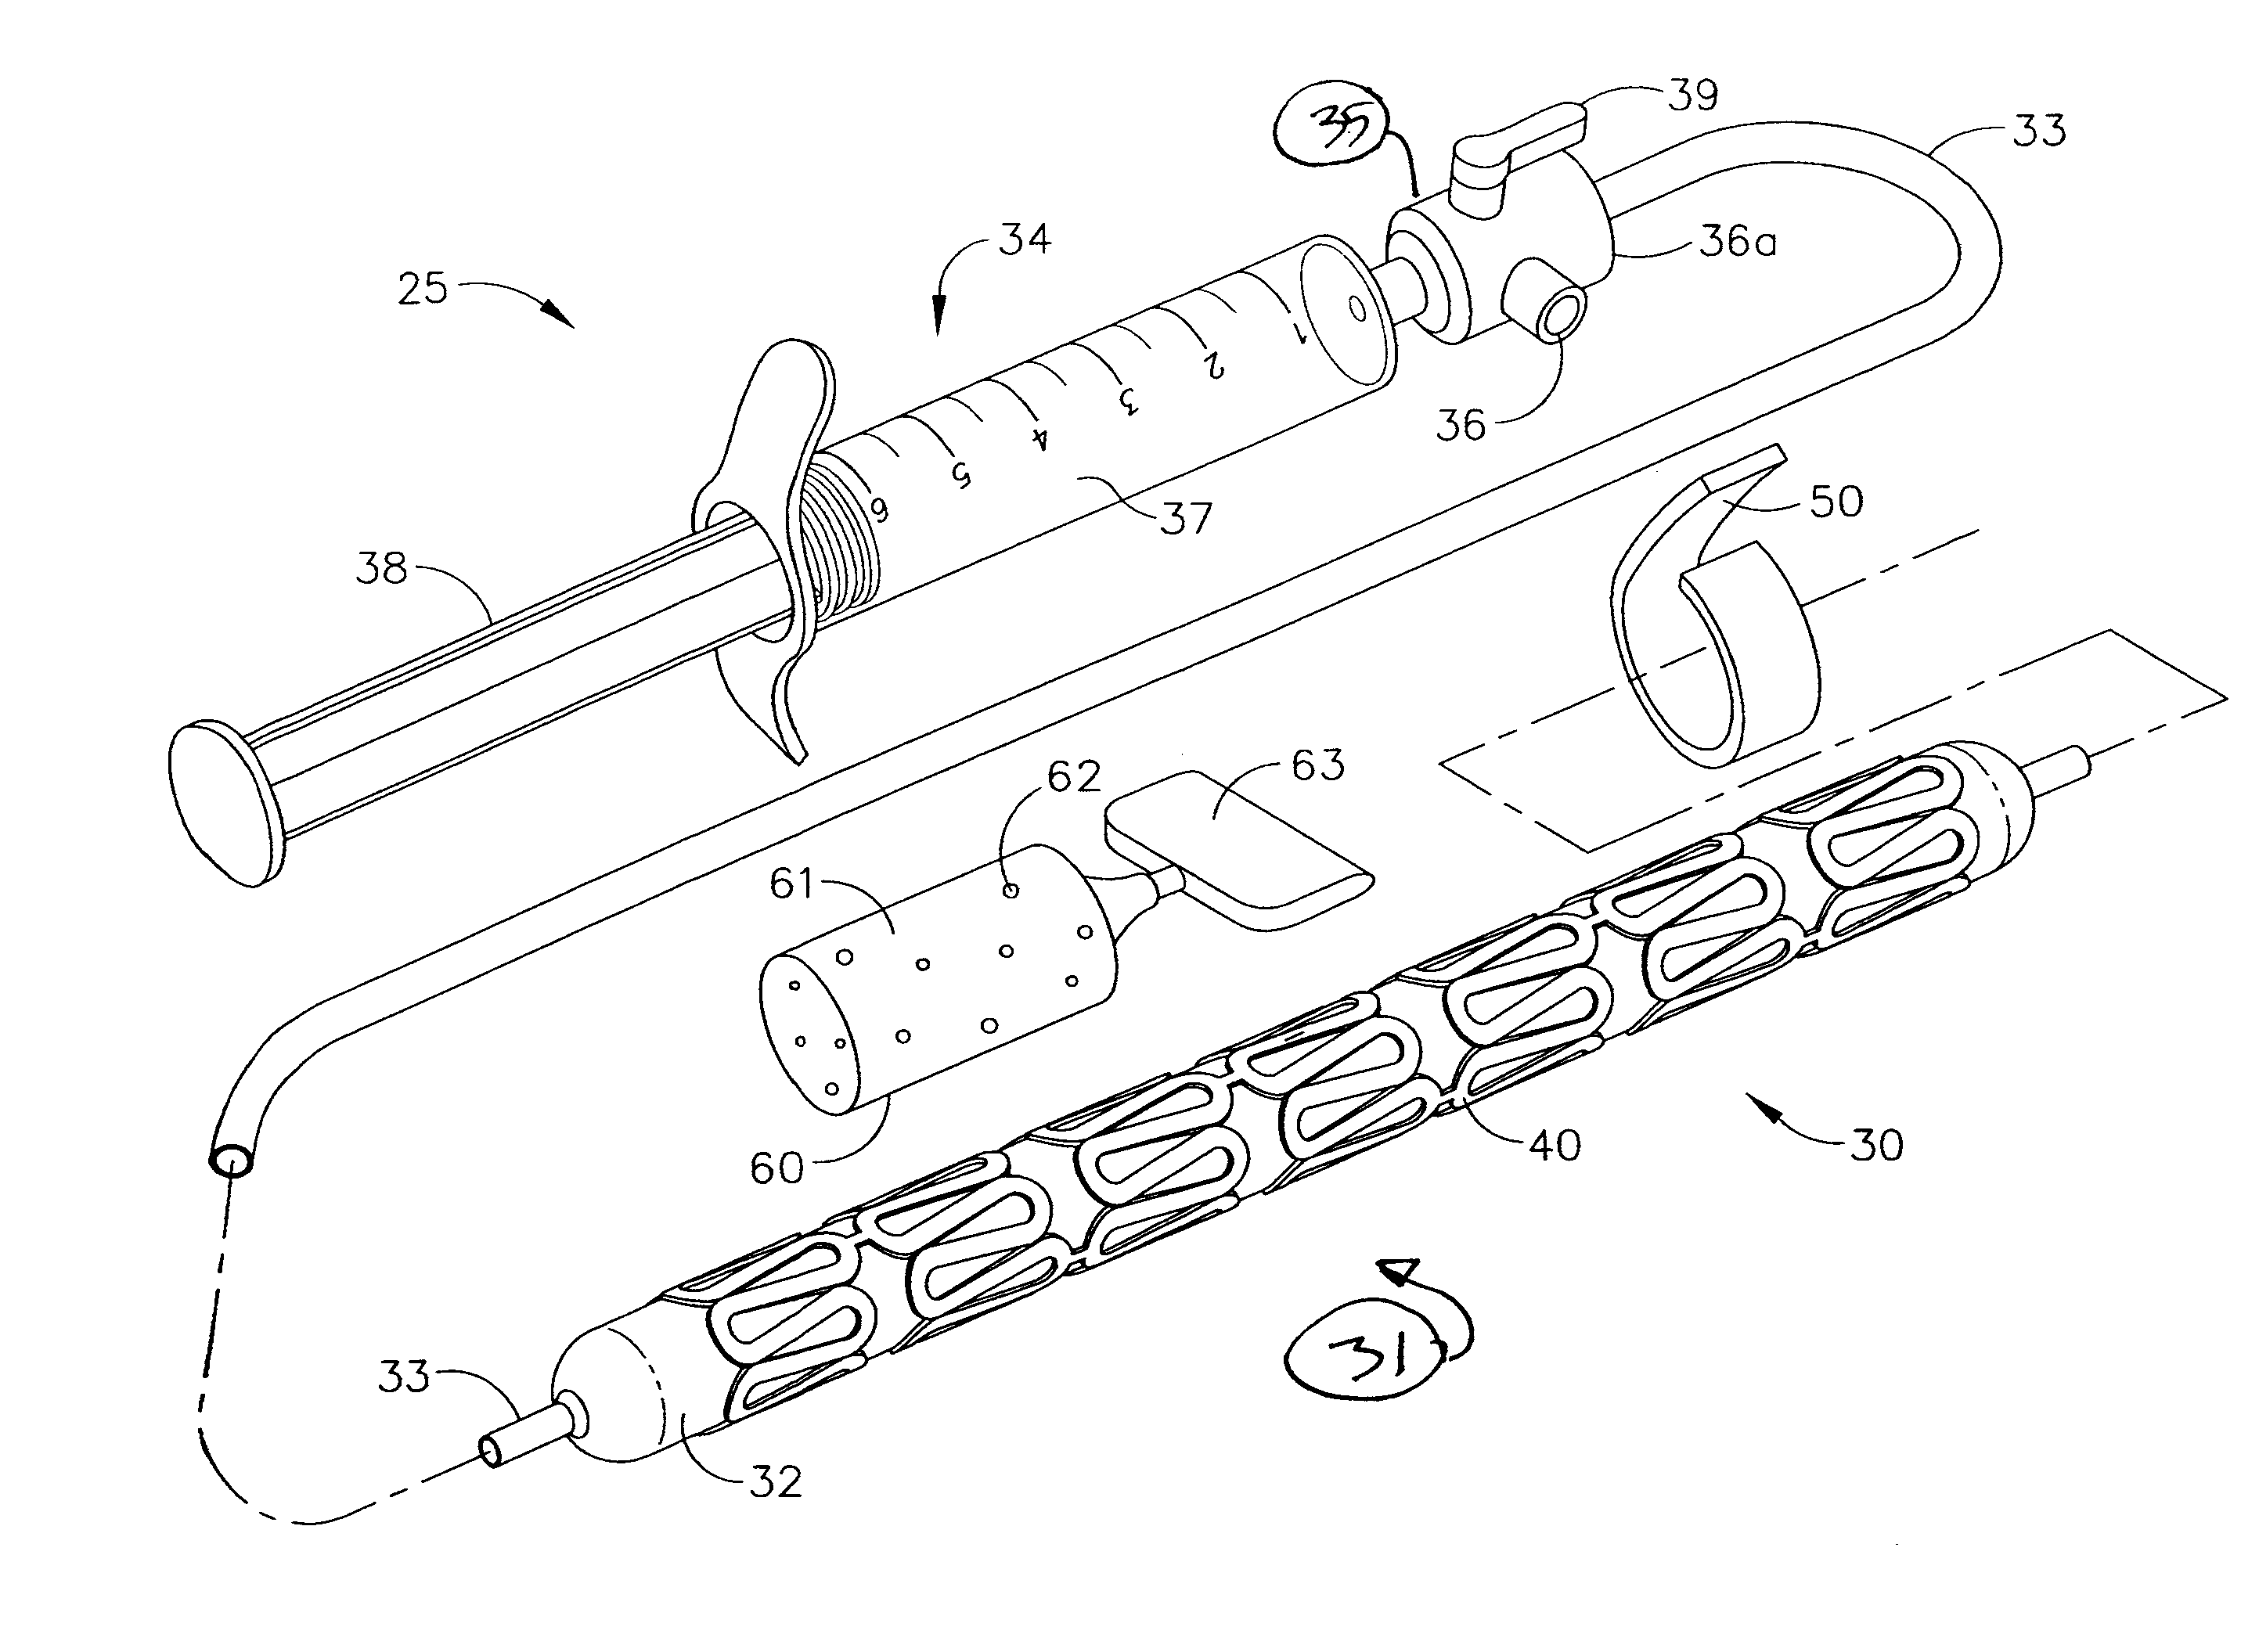 Method of Performing An End-to-End Anastomosis Using a Stent and an Adhesive